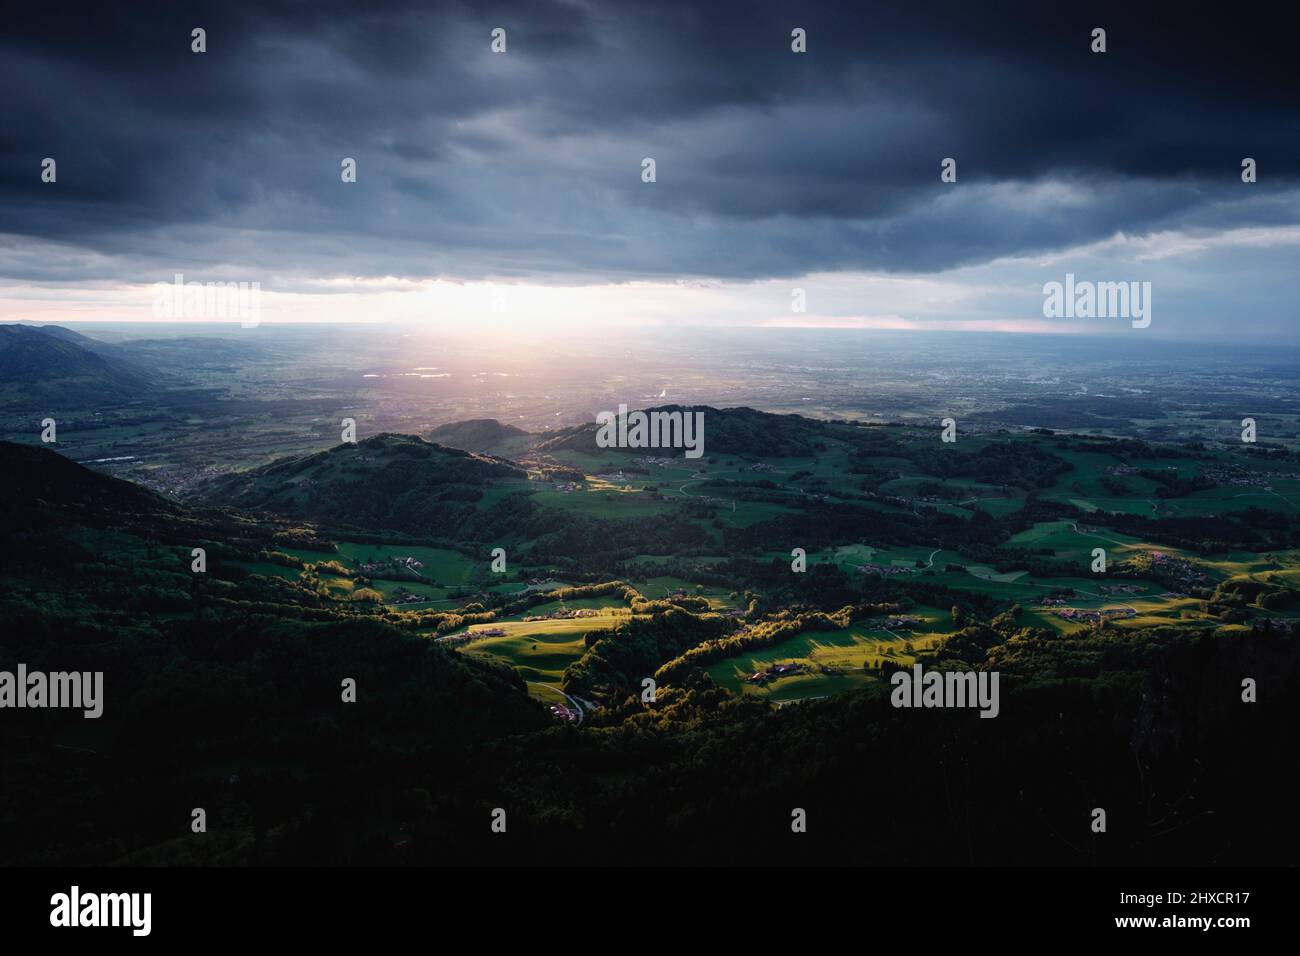 Landscape image of green valley hit by sunlight under rainy clouds at sunset Stock Photo